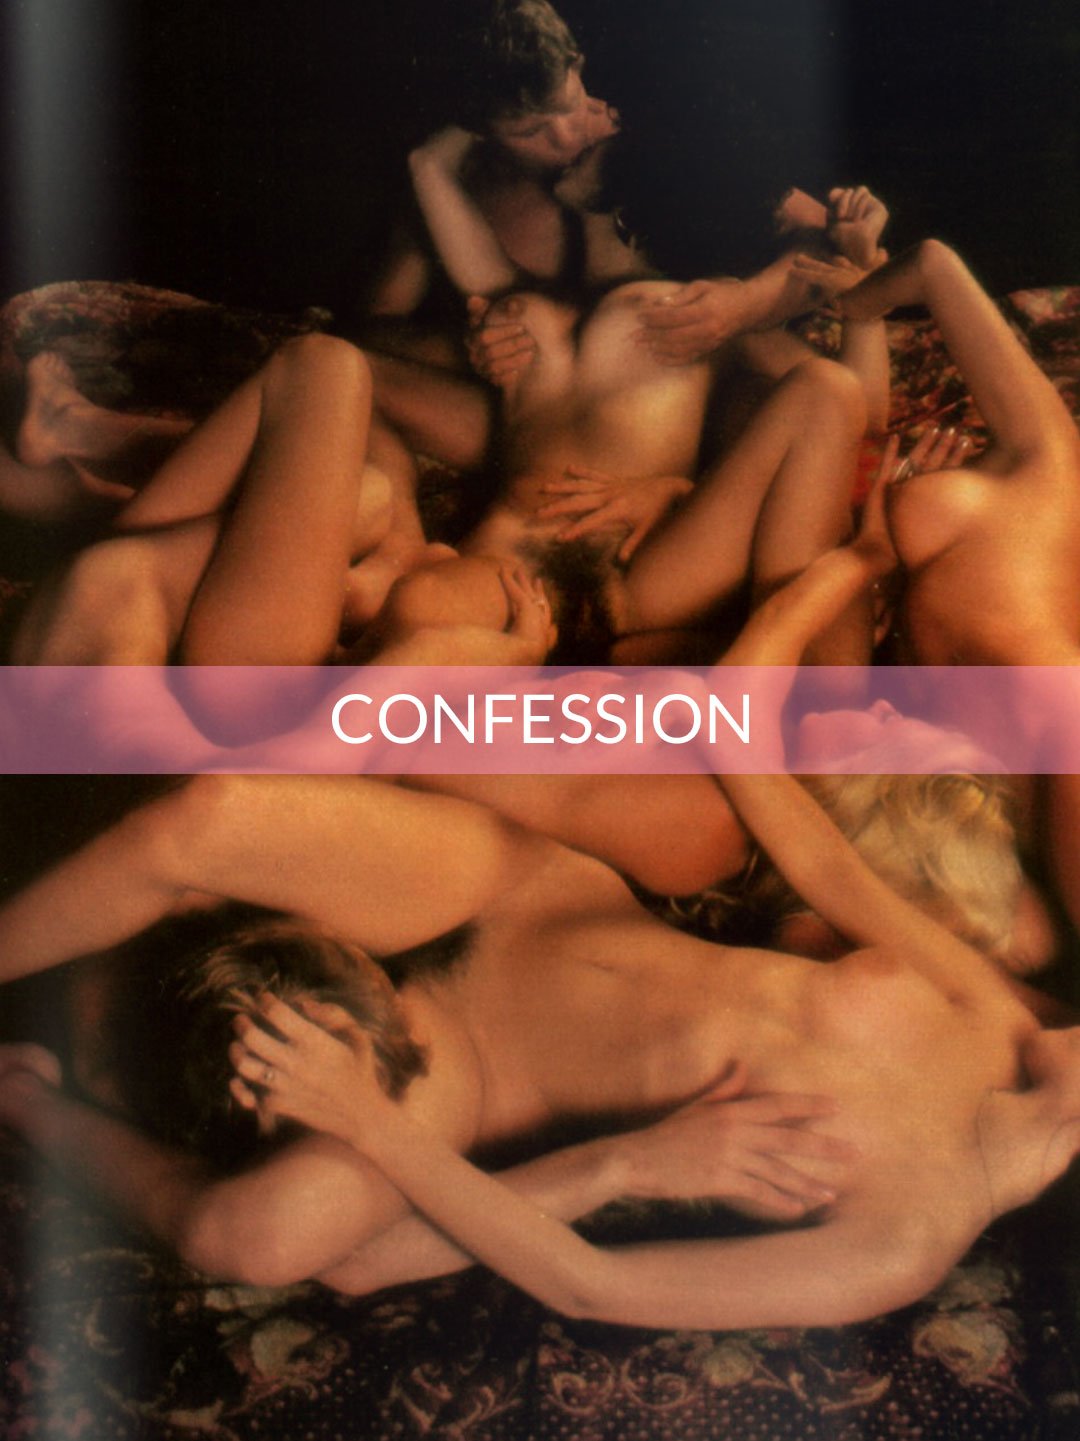 My readers real sex story confessions from couples and women